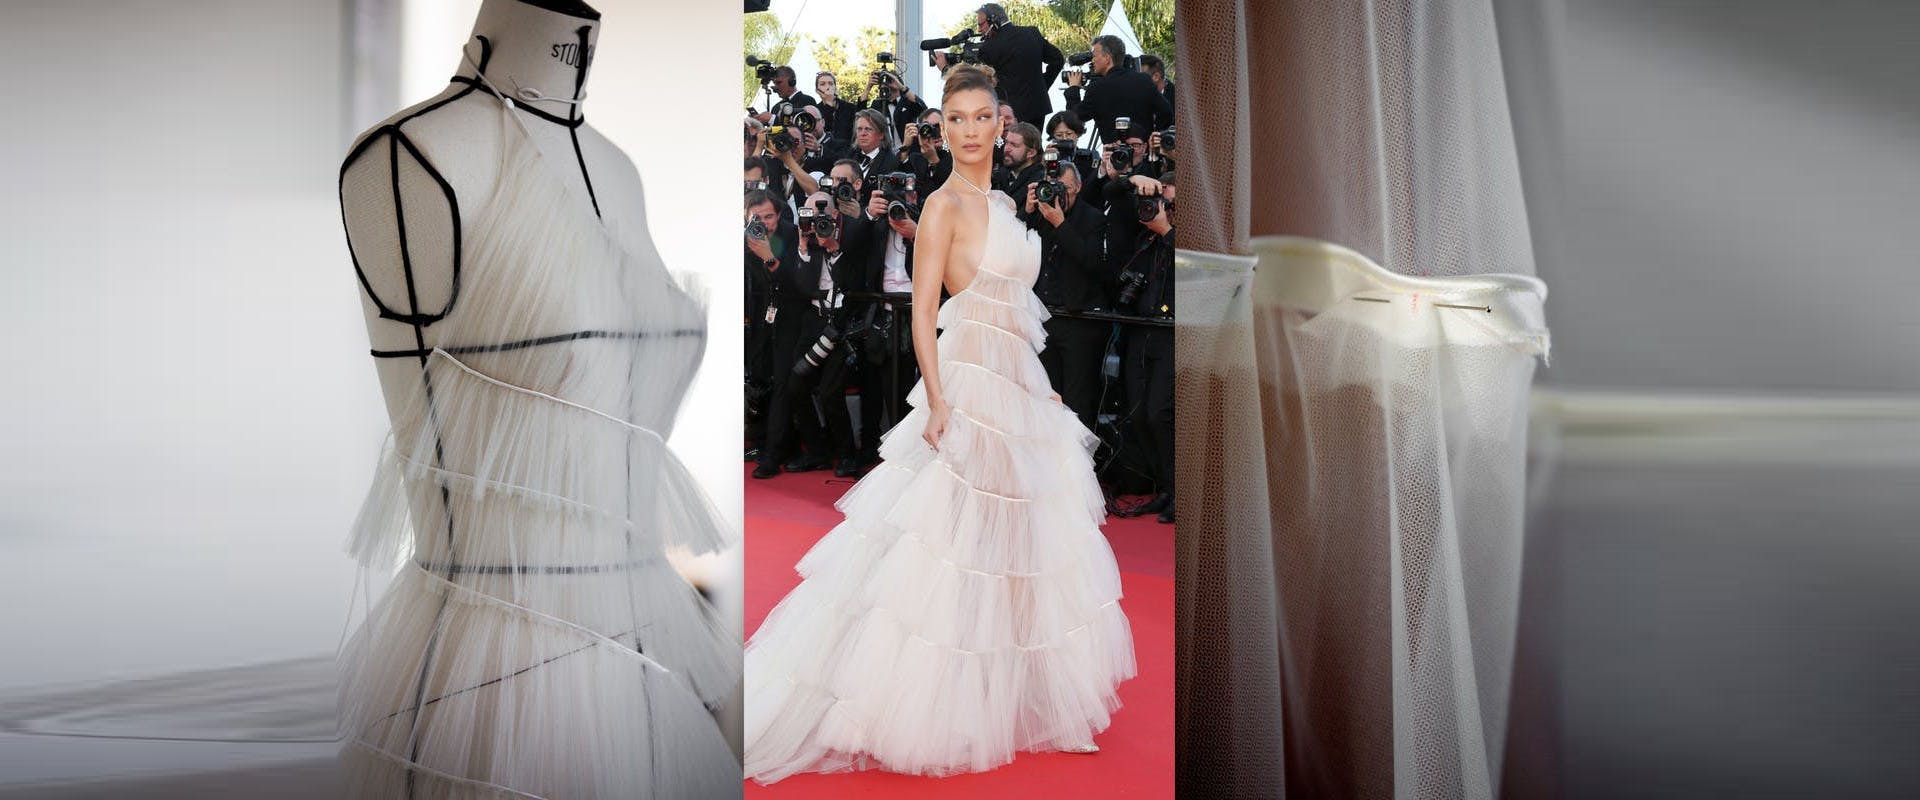 fashion premiere red carpet red carpet premiere wedding gown clothing wedding gown robe apparel